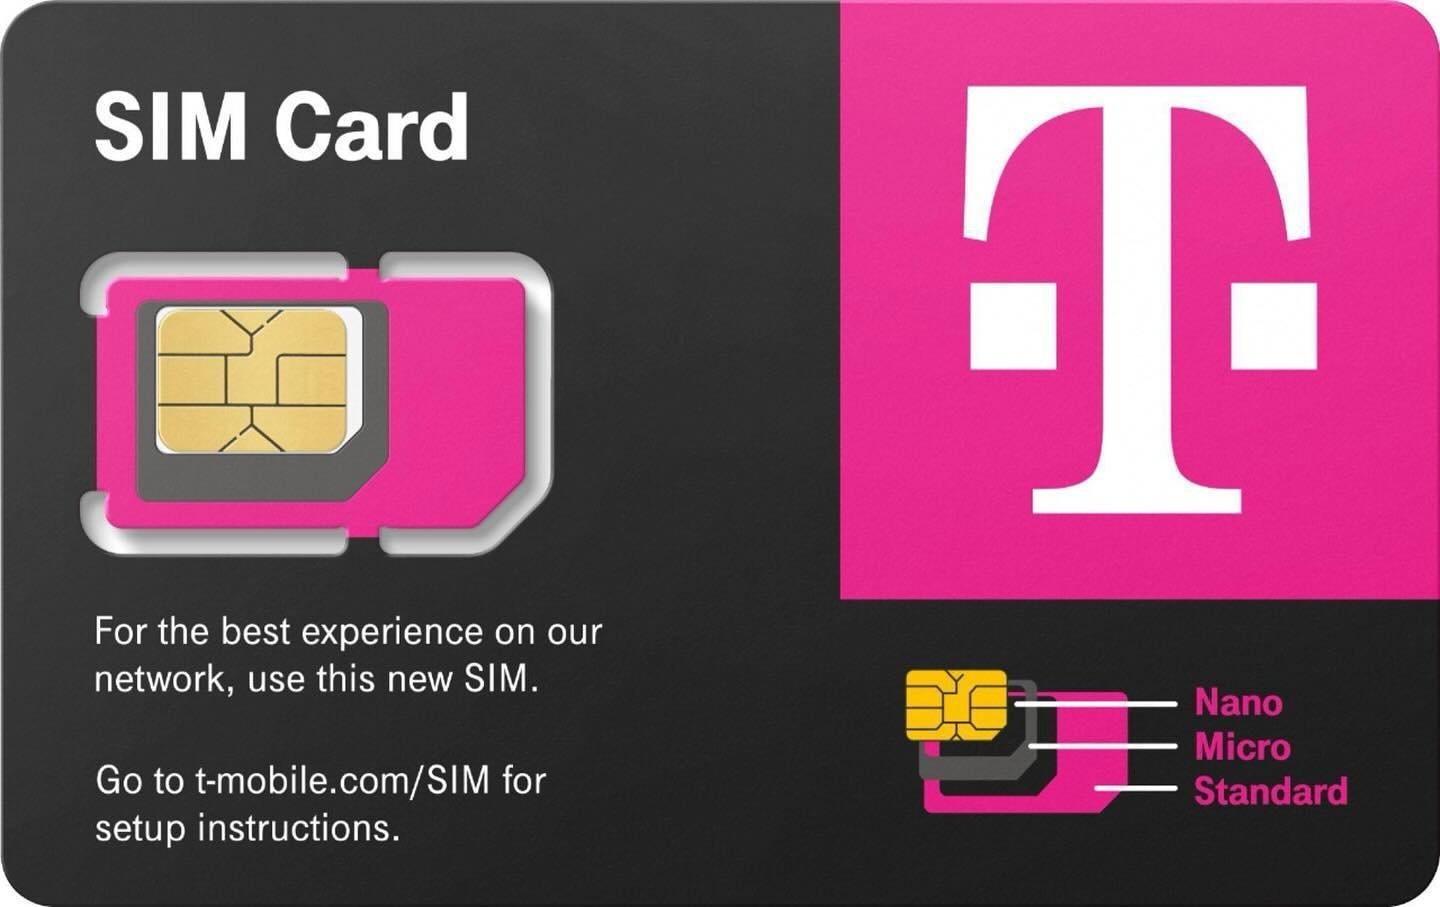 T-Mobile Prepaid Blank SIM Cards

MOQ : 25

Pick up available in Newark, NJ

Comissionable with epay

Link : https://icont.ac/4XMlW 

- #tmobile #tmobileprepaid #epay #sim #simcard